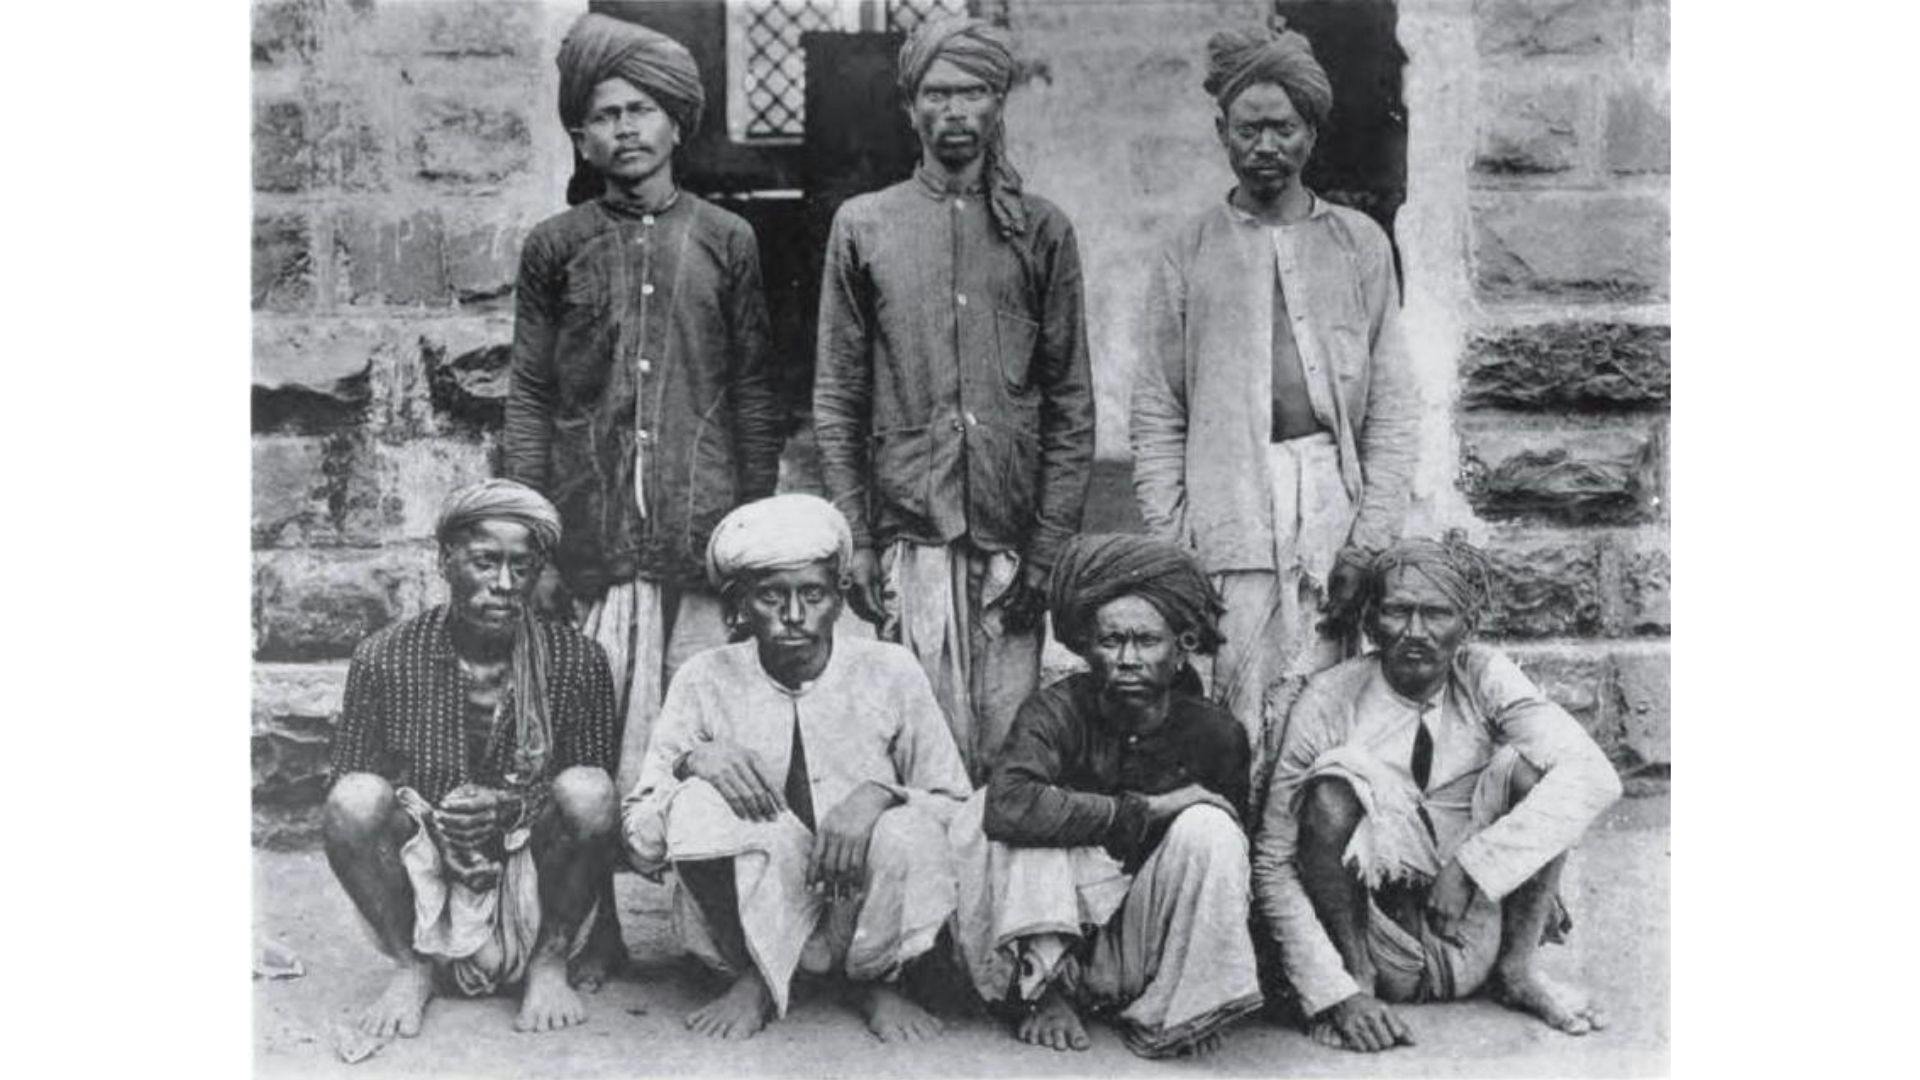 A group of Kunbis, the main farming community during the period | Wikimedia Commons